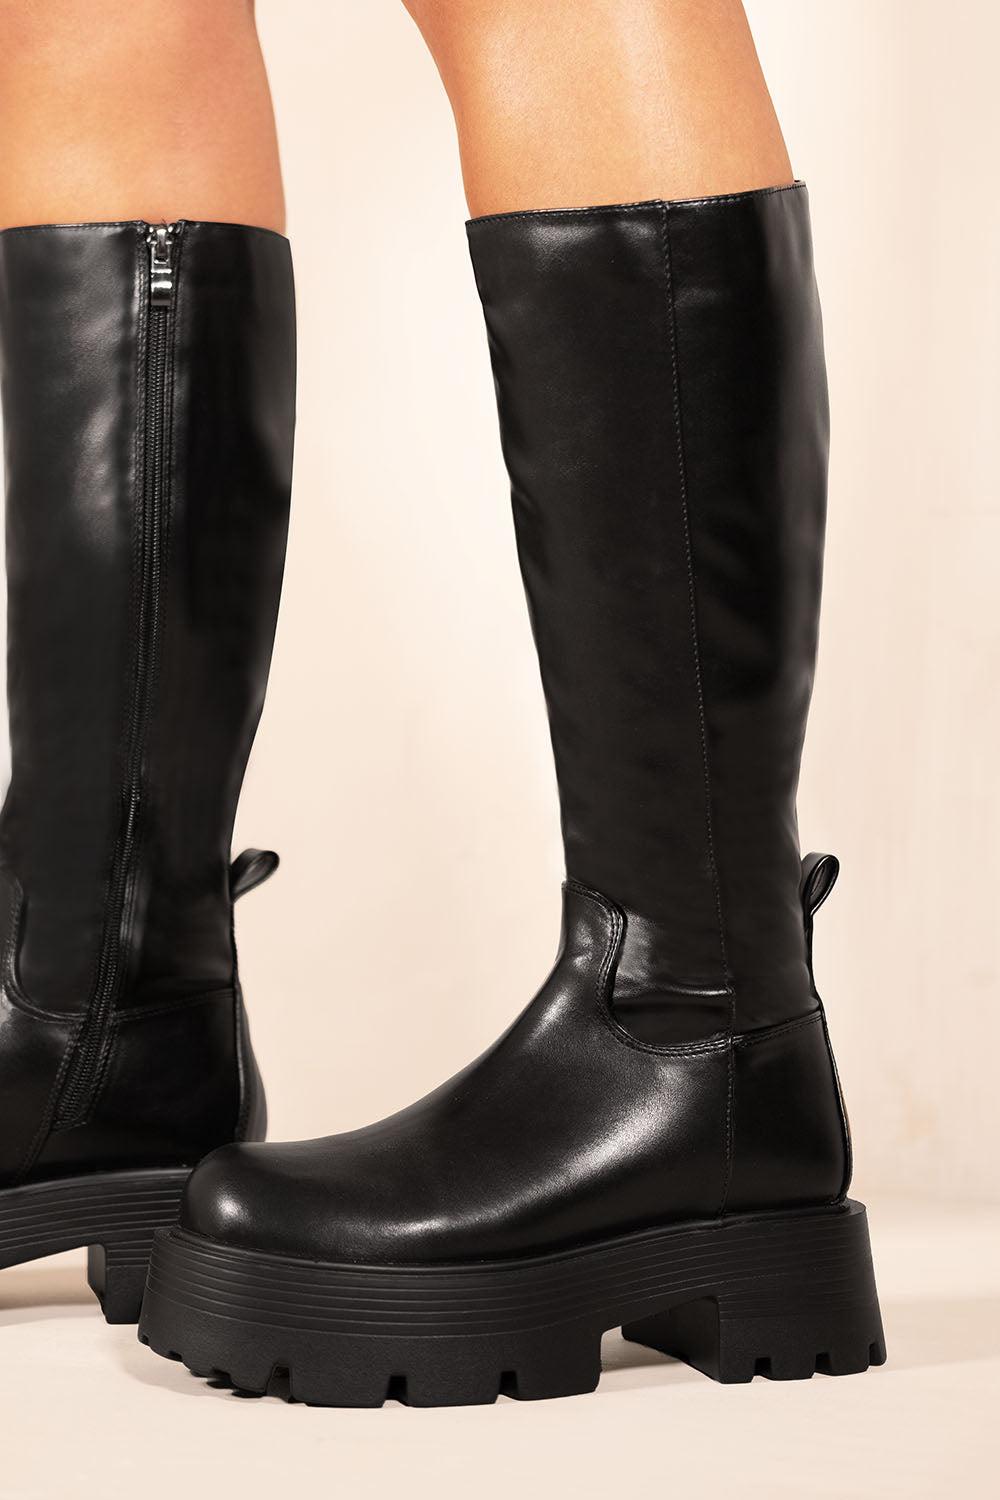 Where's That From Marika Chunky Platform Calf High Boots With Side Zip in  Black | Lyst